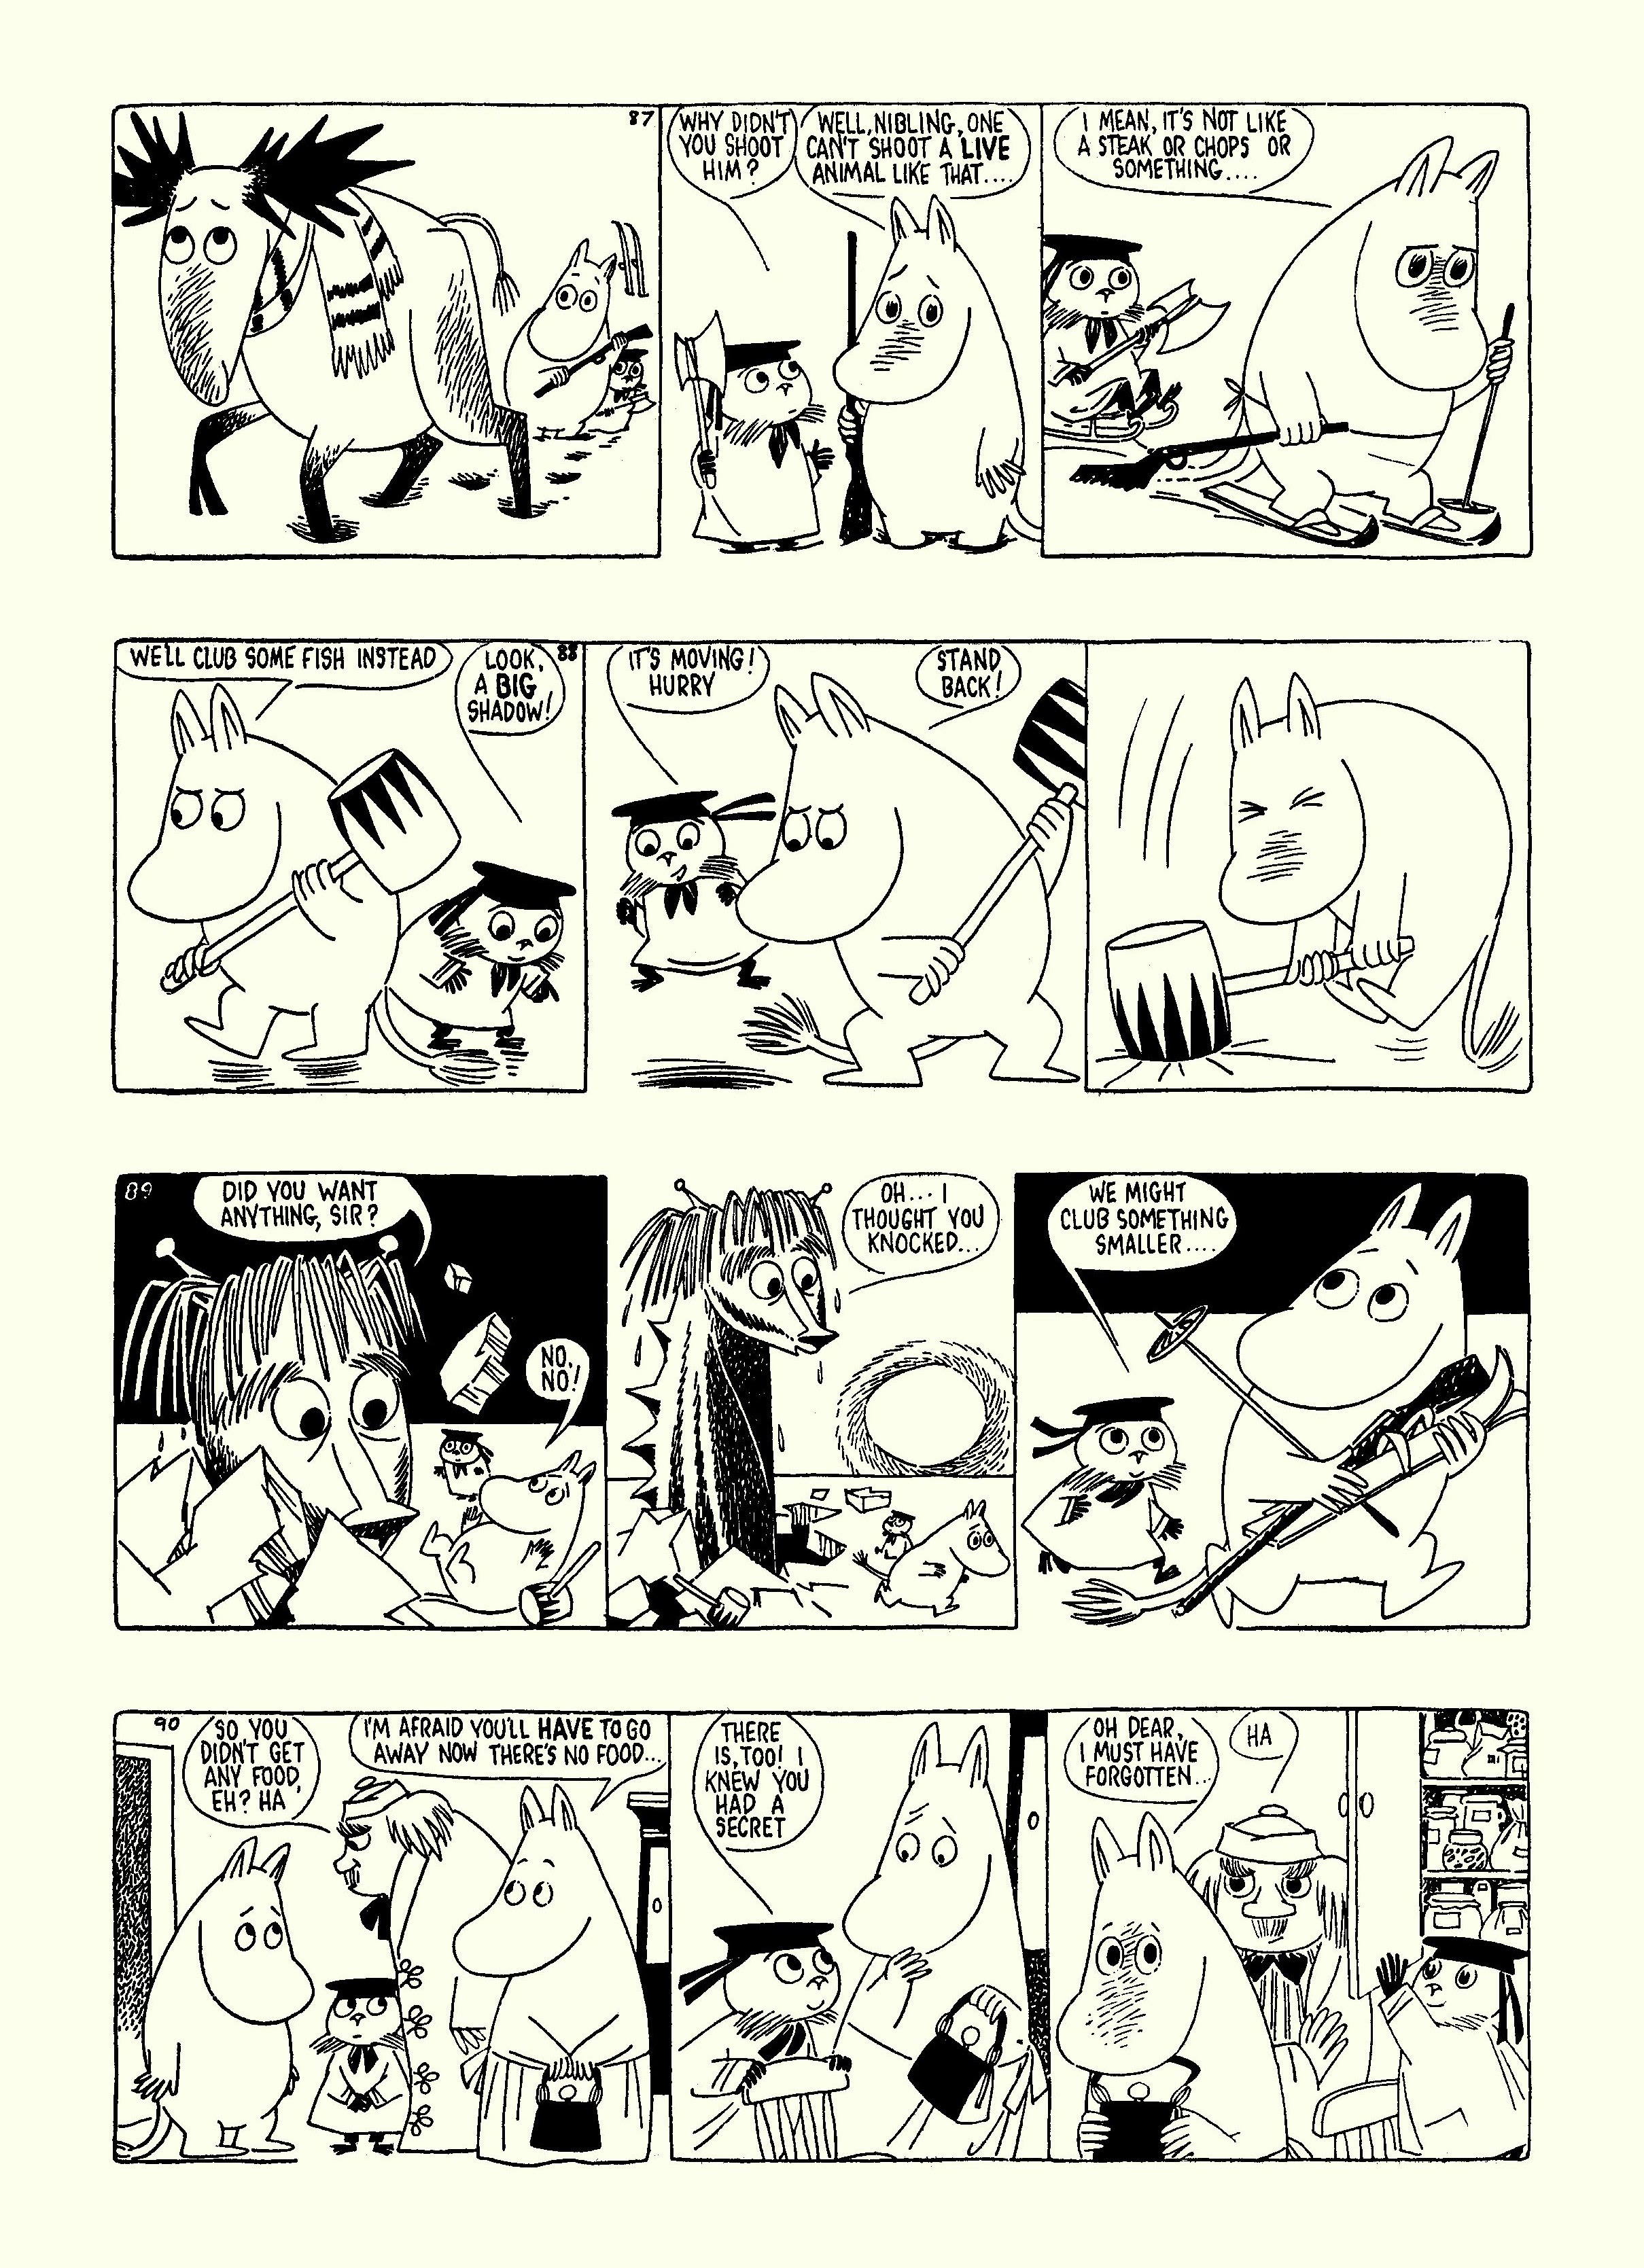 Read online Moomin: The Complete Tove Jansson Comic Strip comic -  Issue # TPB 5 - 28